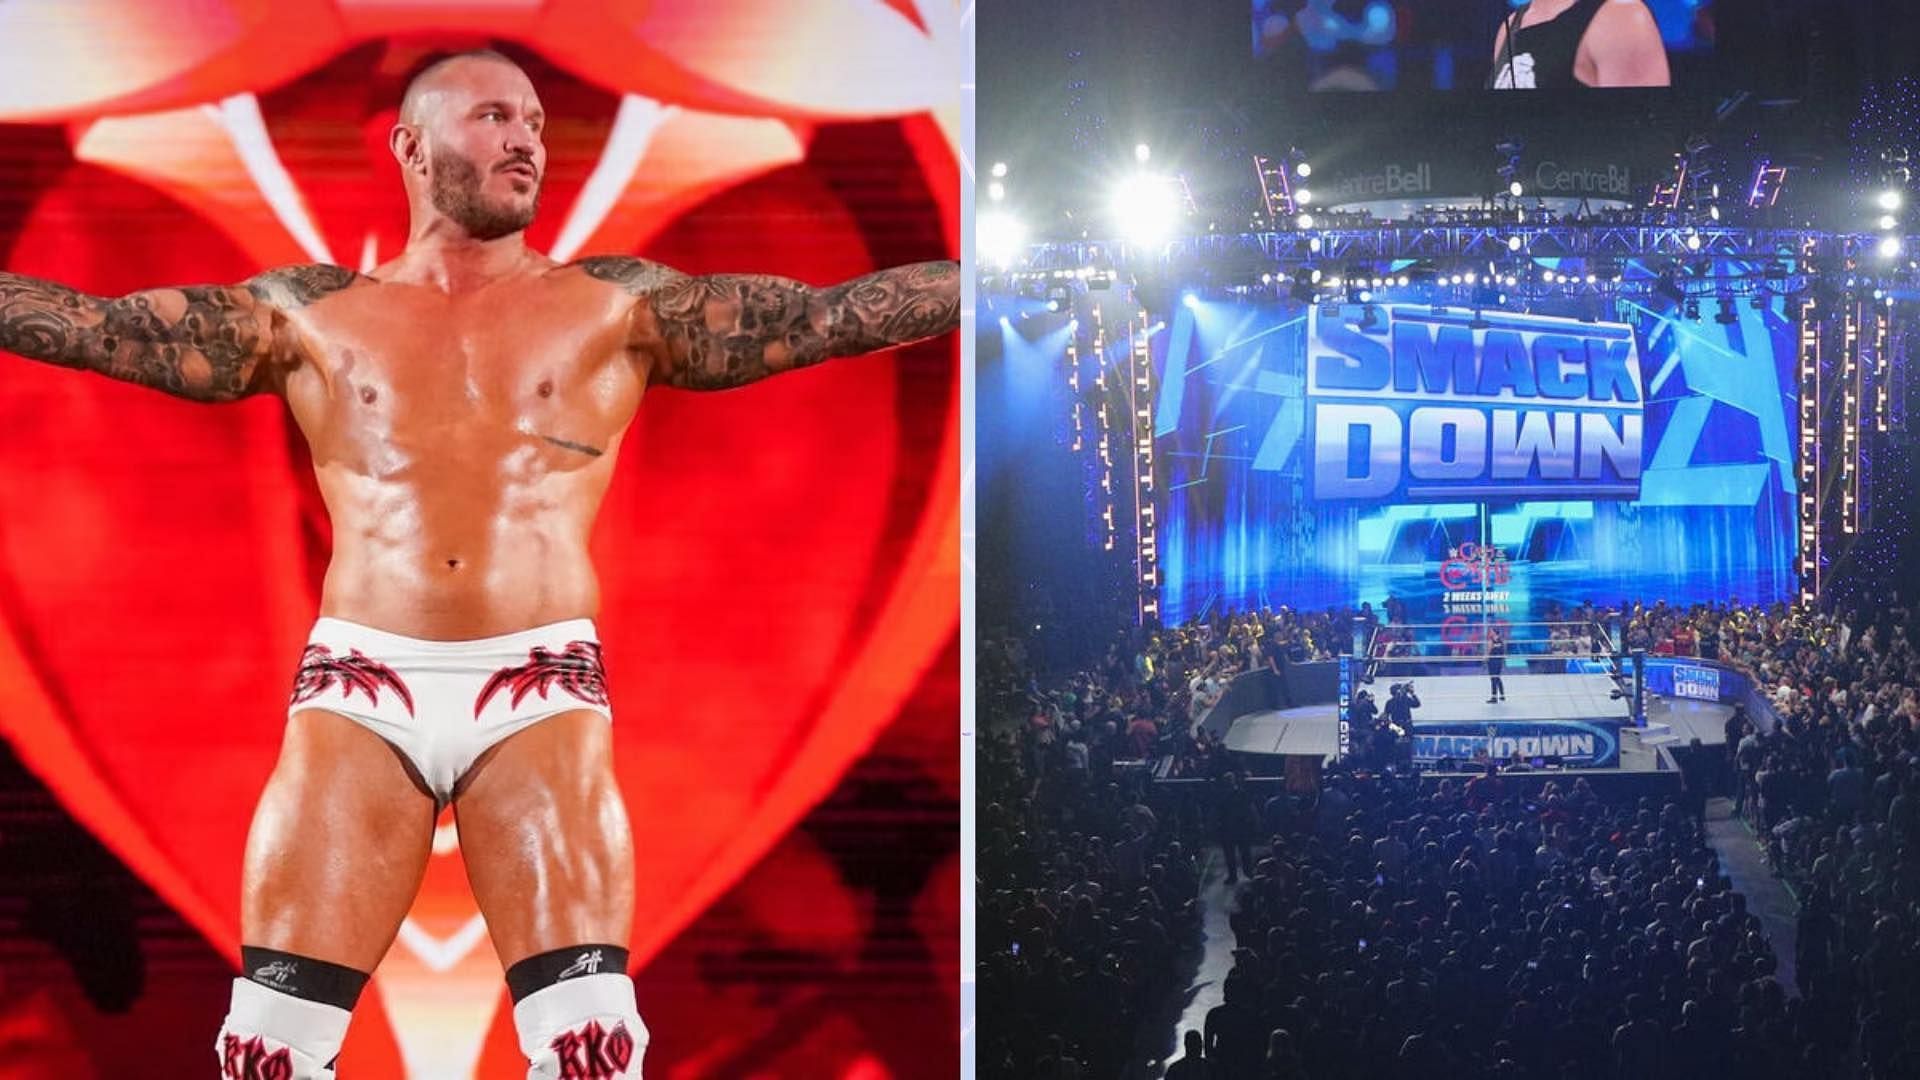 Things will be different for Randy Orton in WWE (Source: WWE)